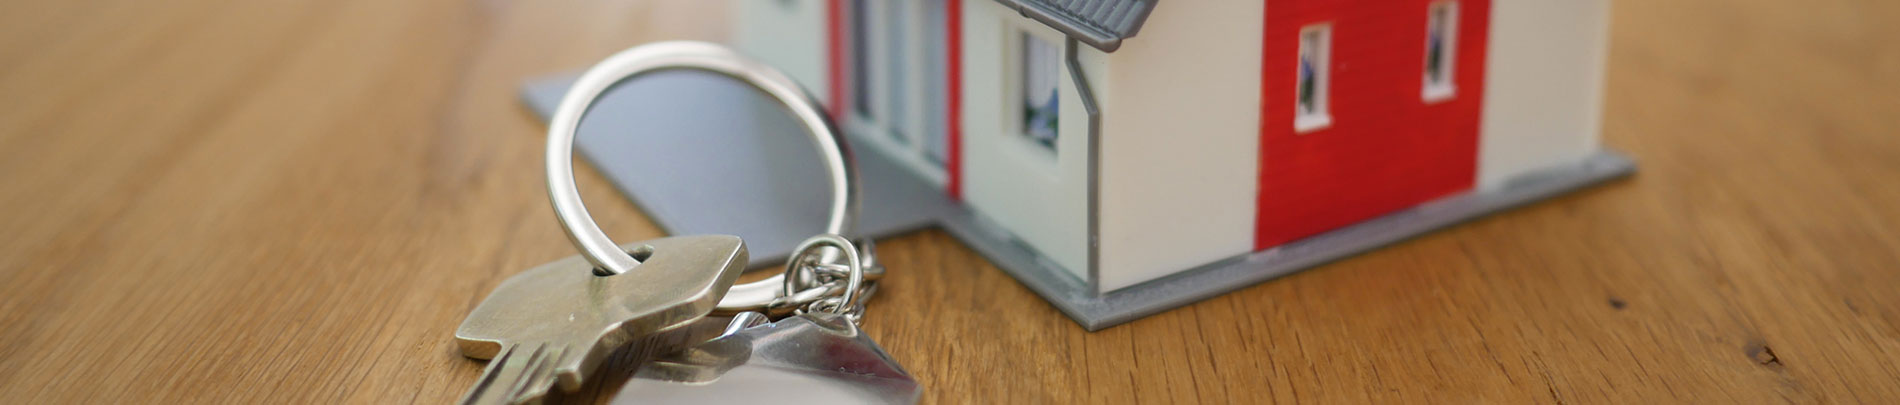 A set of house keys on a table next to a model of a home.